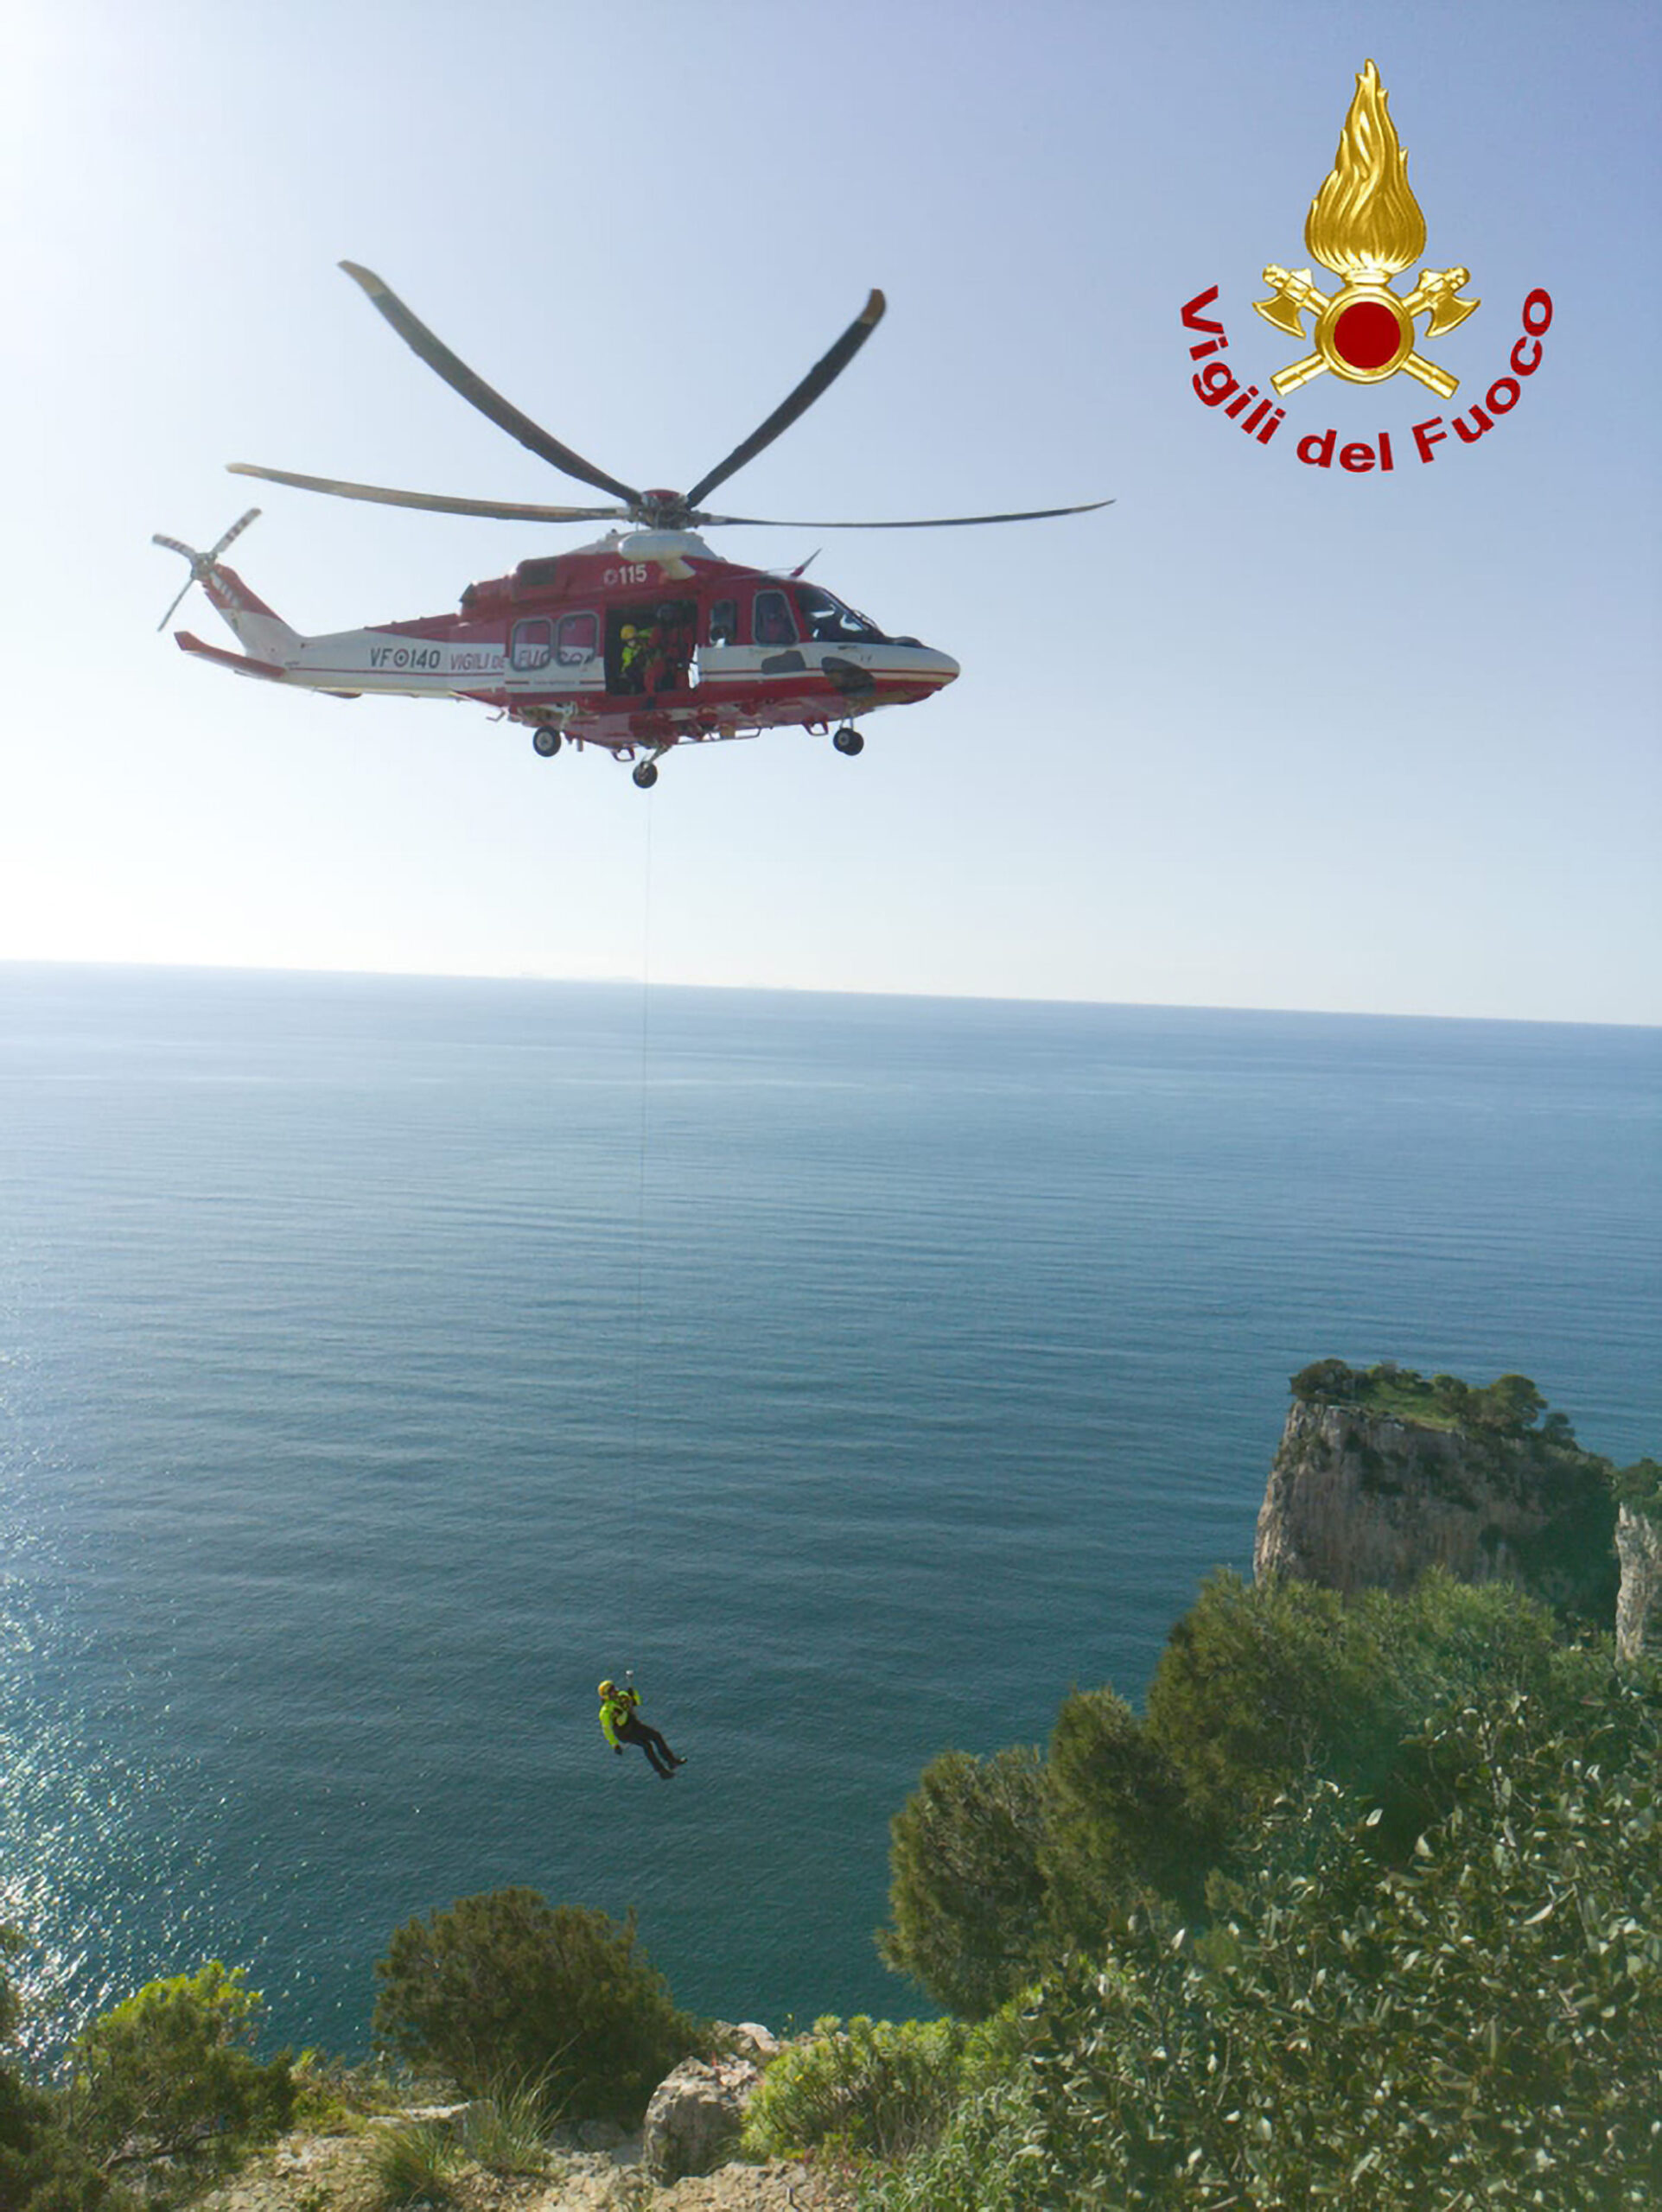 Italian Firefighters Rescue Rock Climbers Trapped On High Cliff Face ...